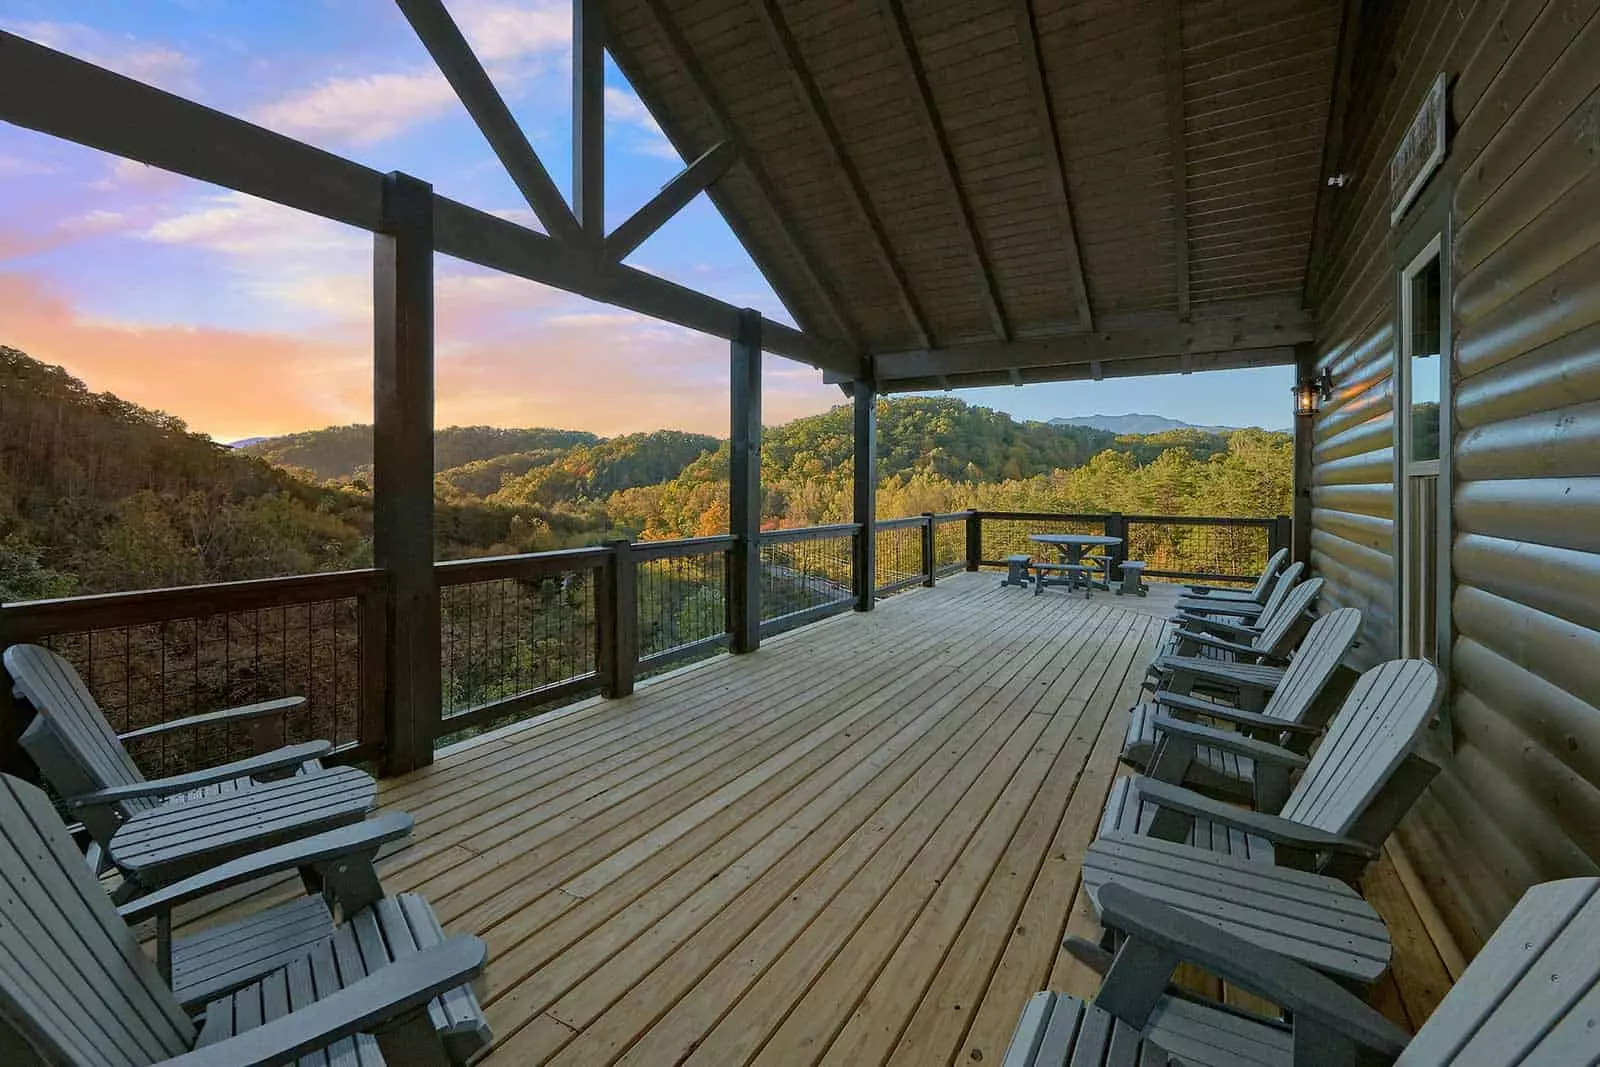 sunset view from deck of Smoky Mountain cabin